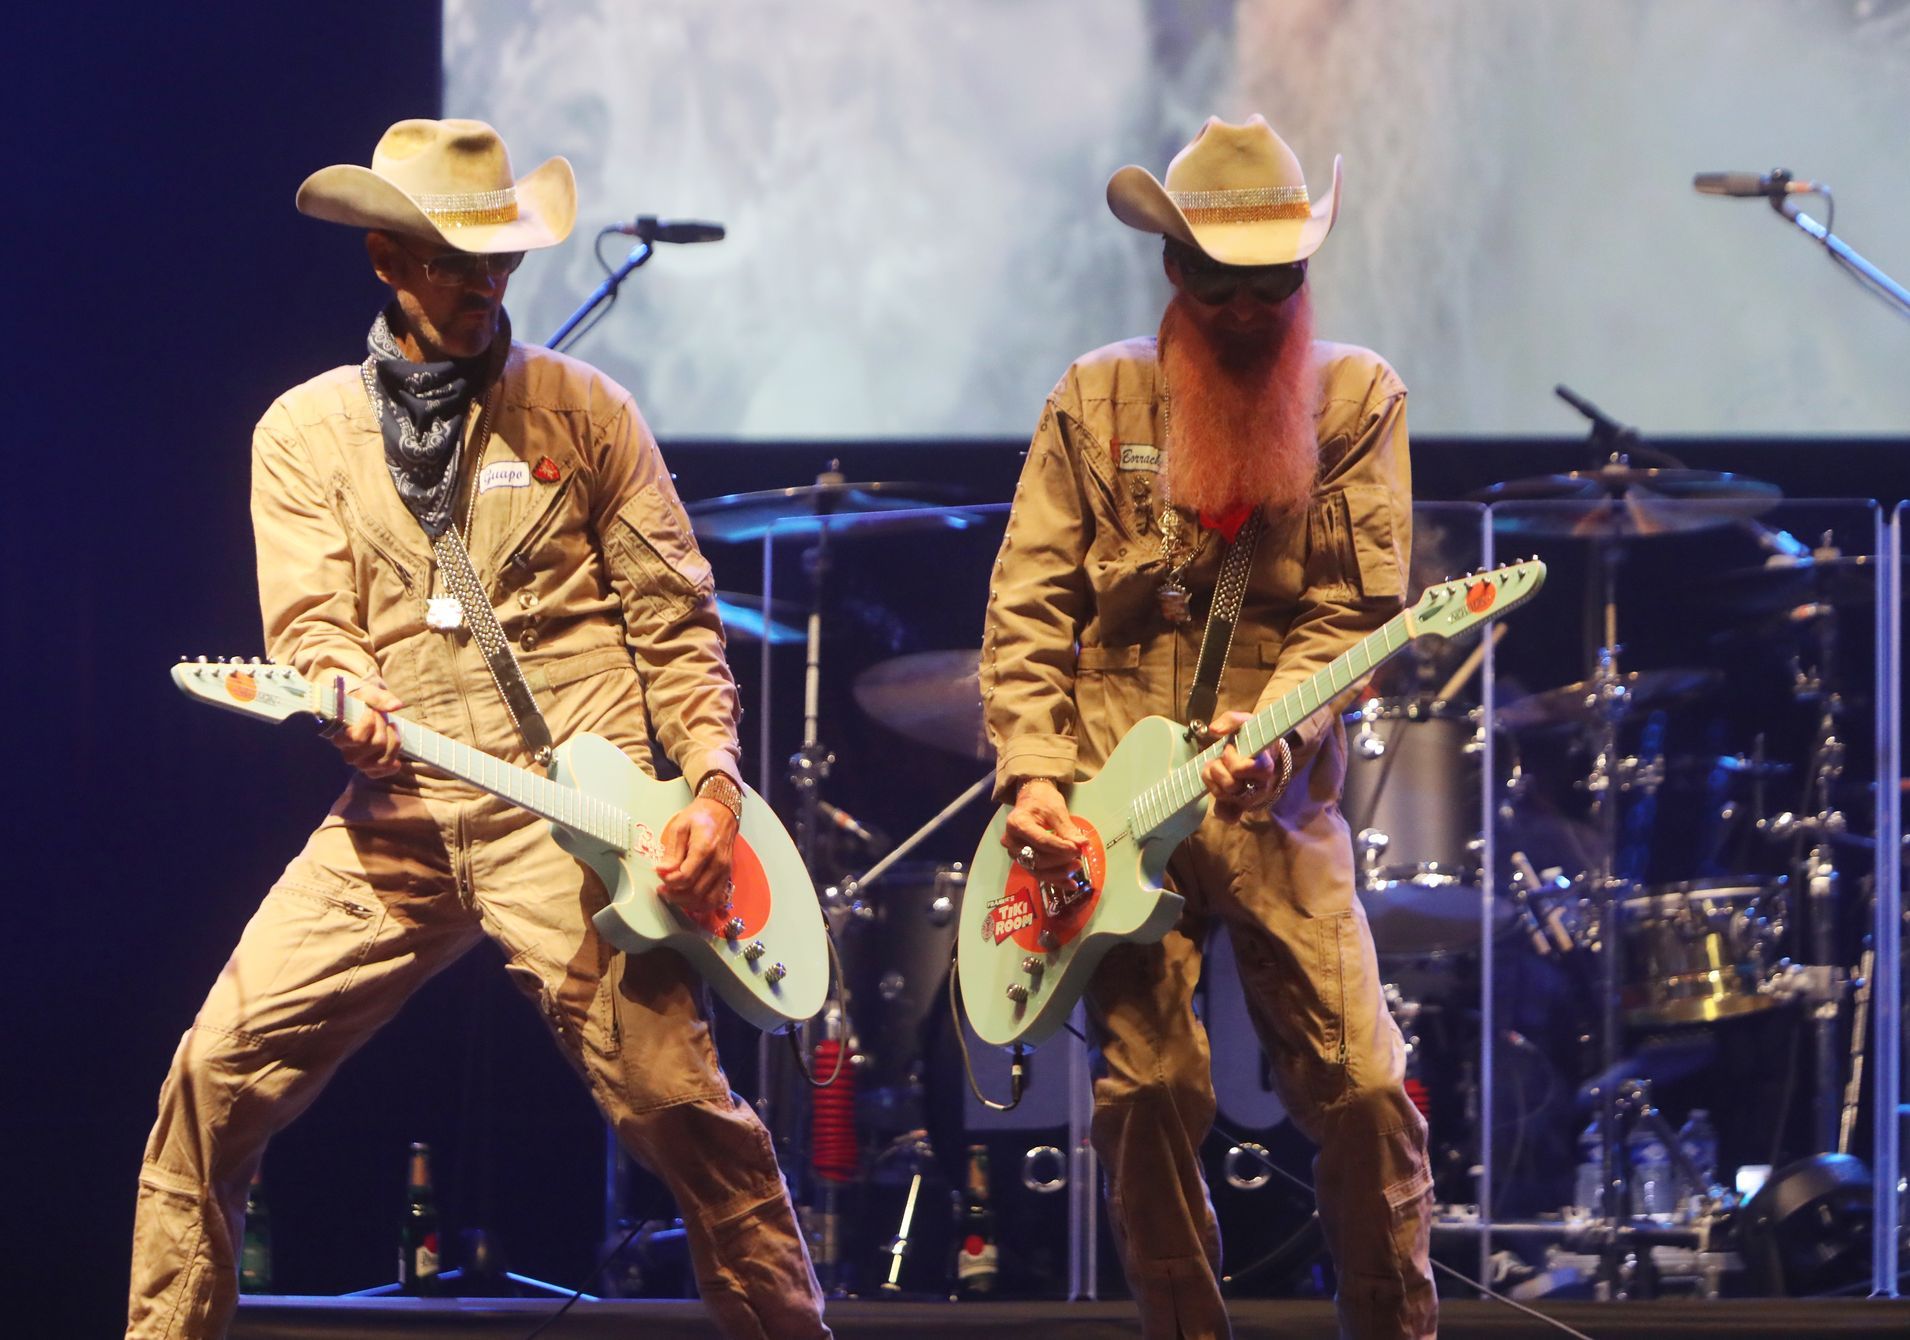 Review of the Billy Gibbons concert in Prague’s O2 universe